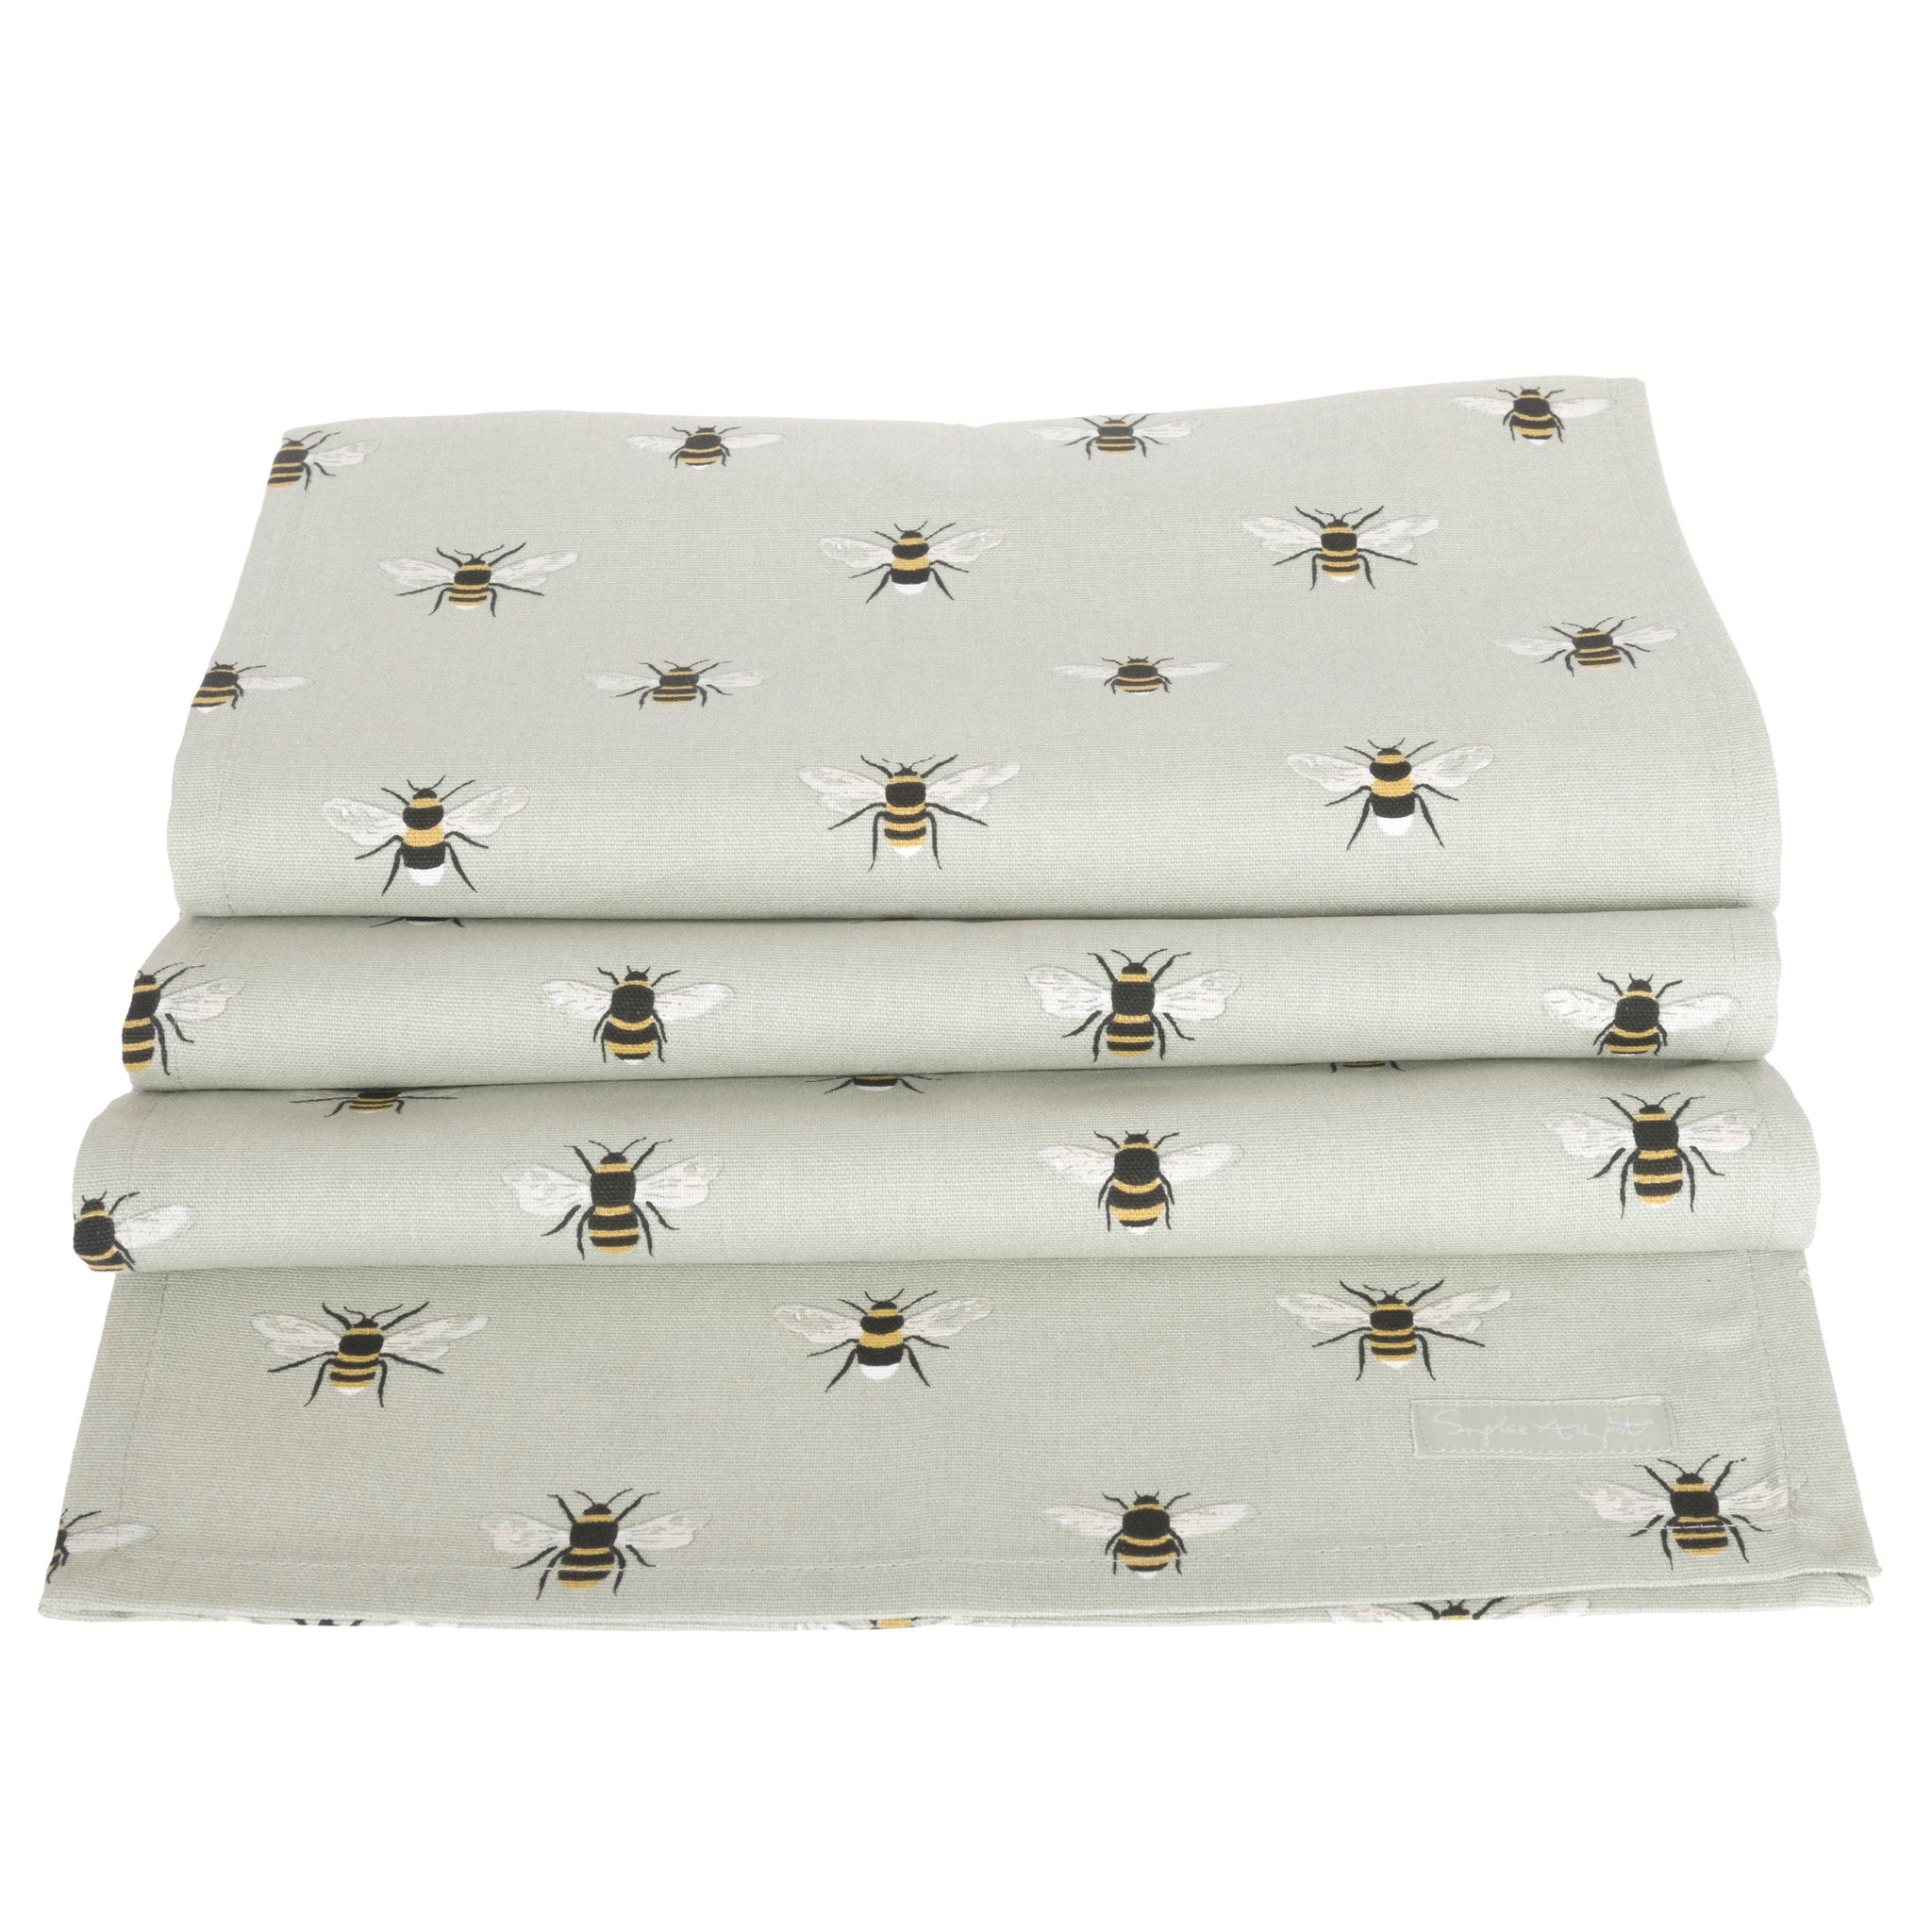 Bees Table Runner by Sophie Allport